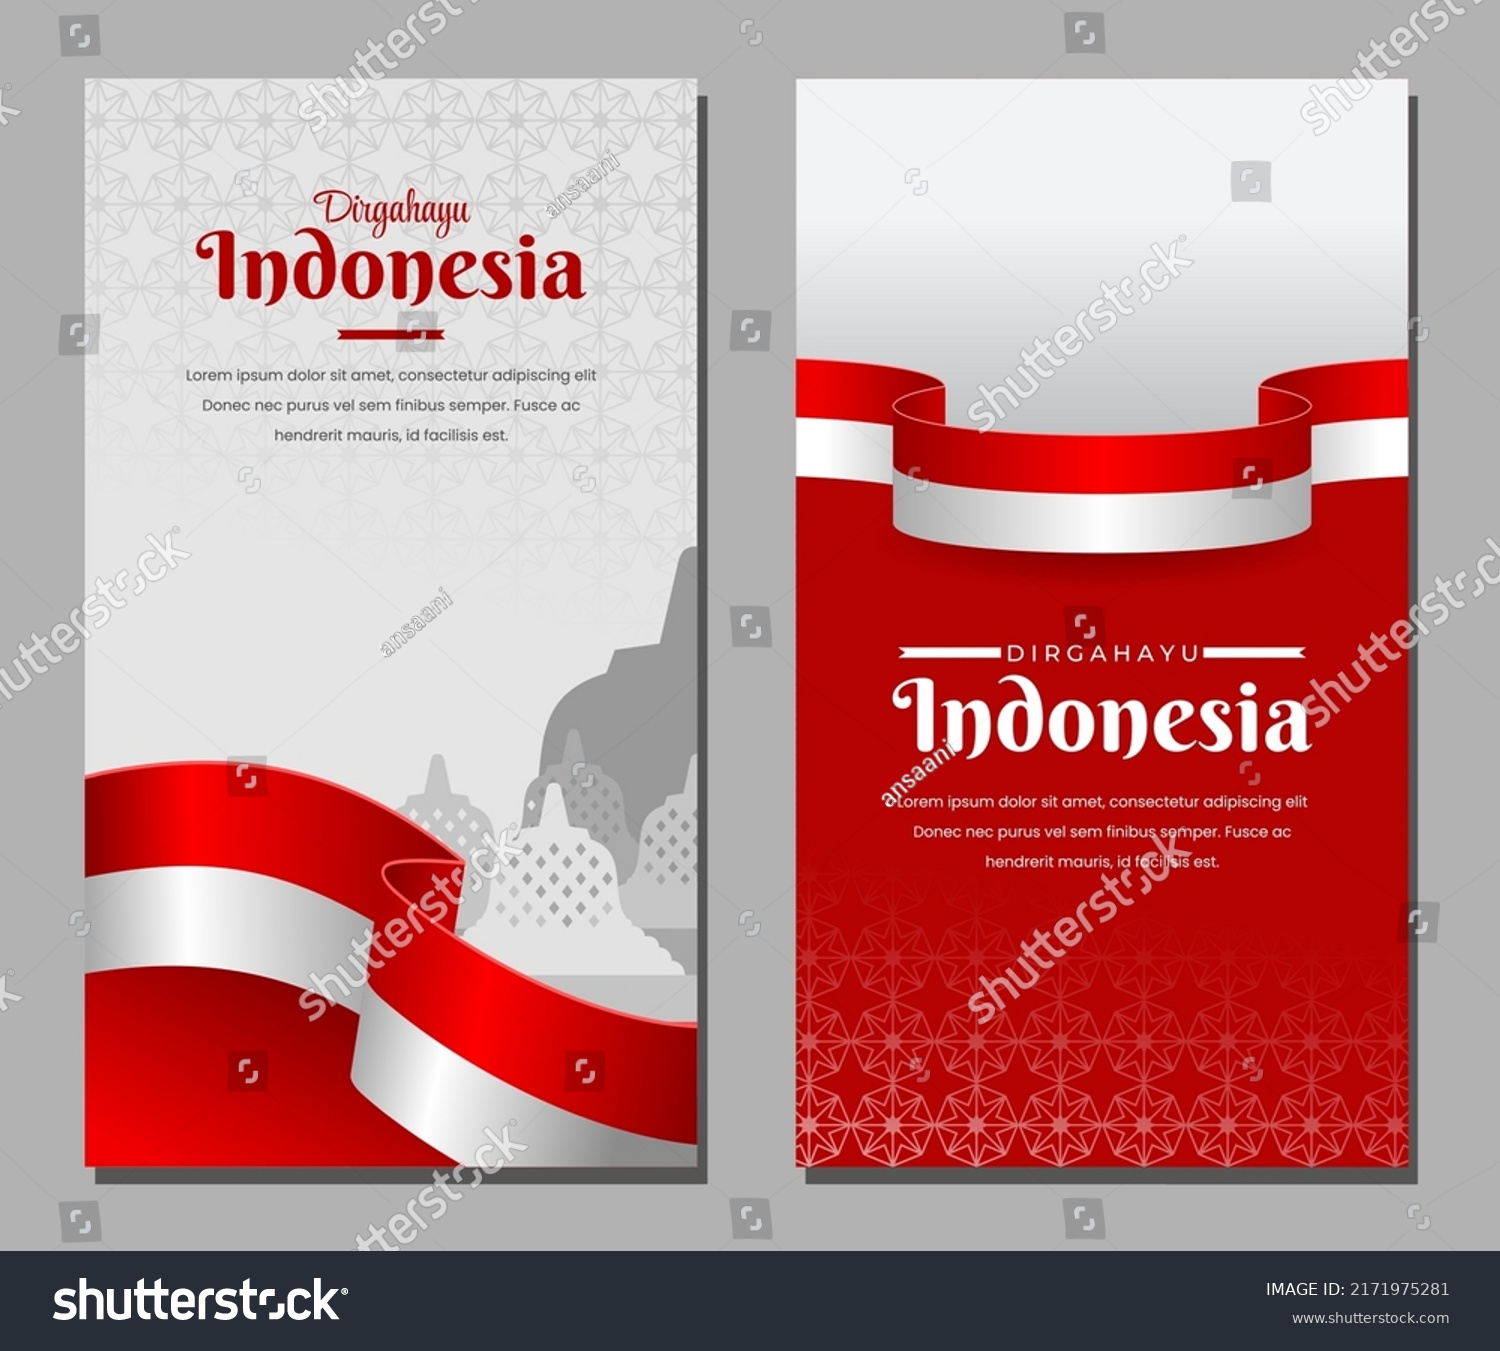 Indonesian Independence Day Greeting Designs Royalty Free Stock Vector 2171975281 1669